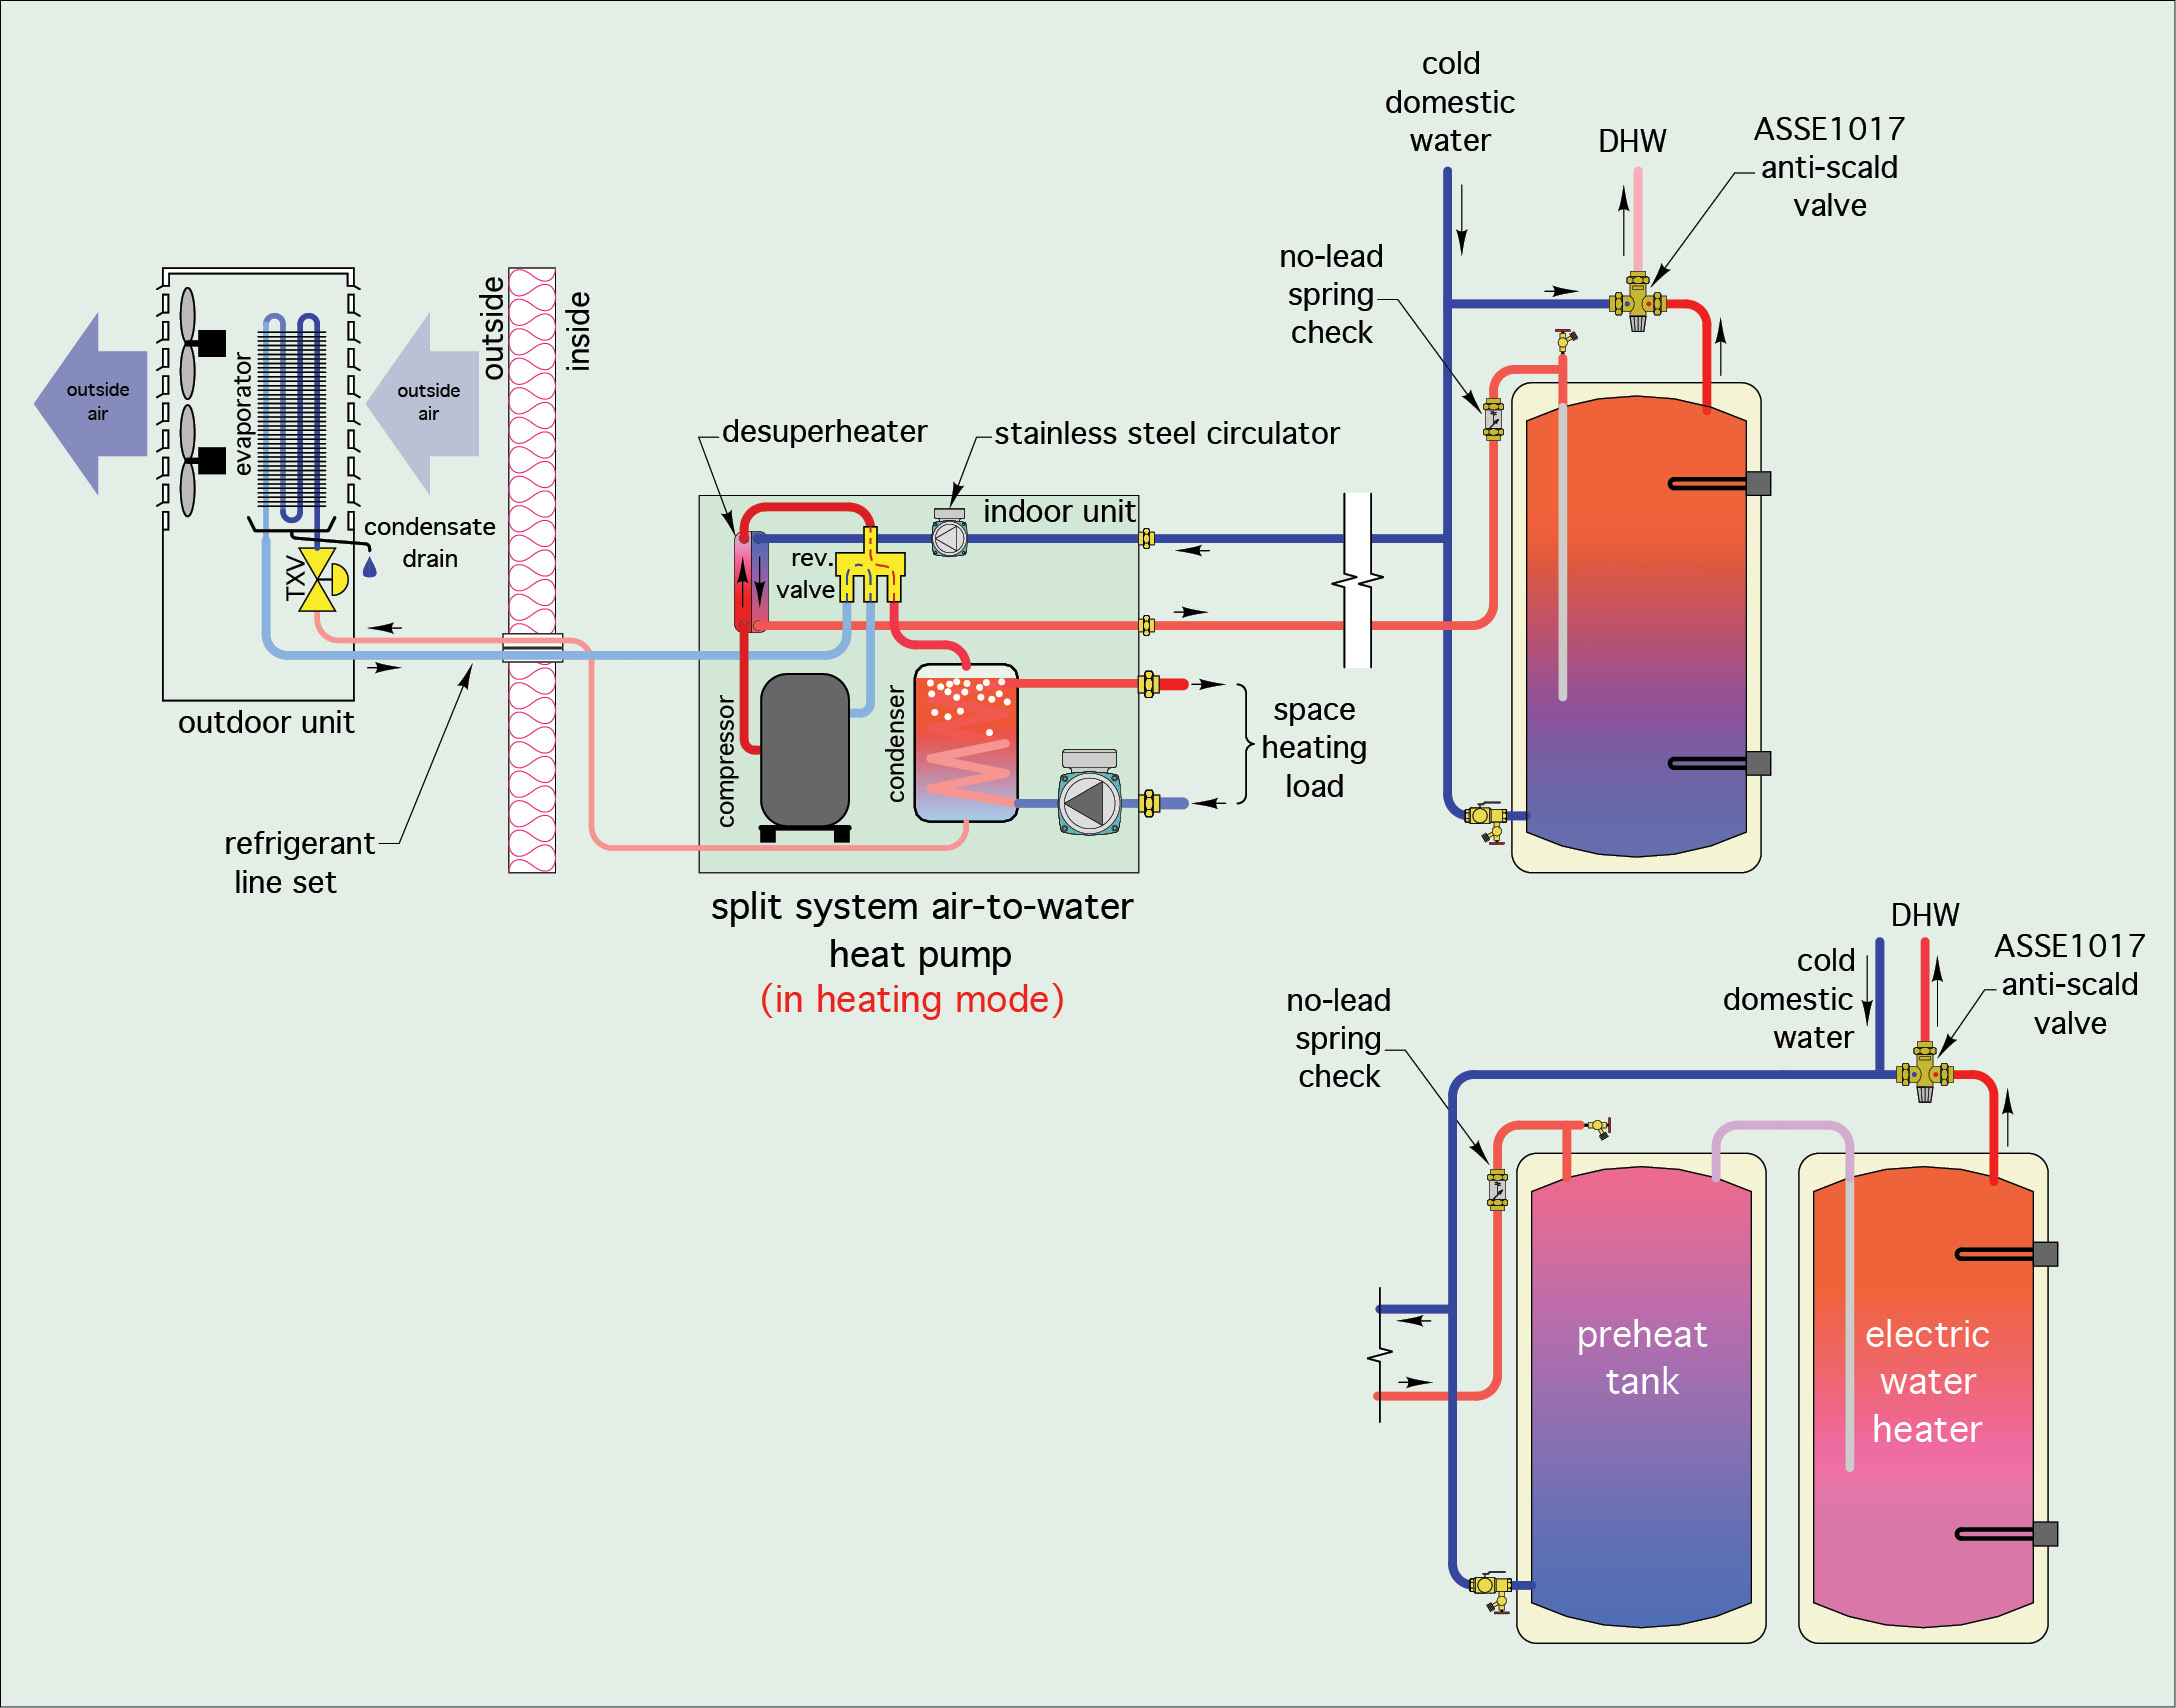 barren-scully-invoice-air-to-water-heat-pump-hydronic-system-email